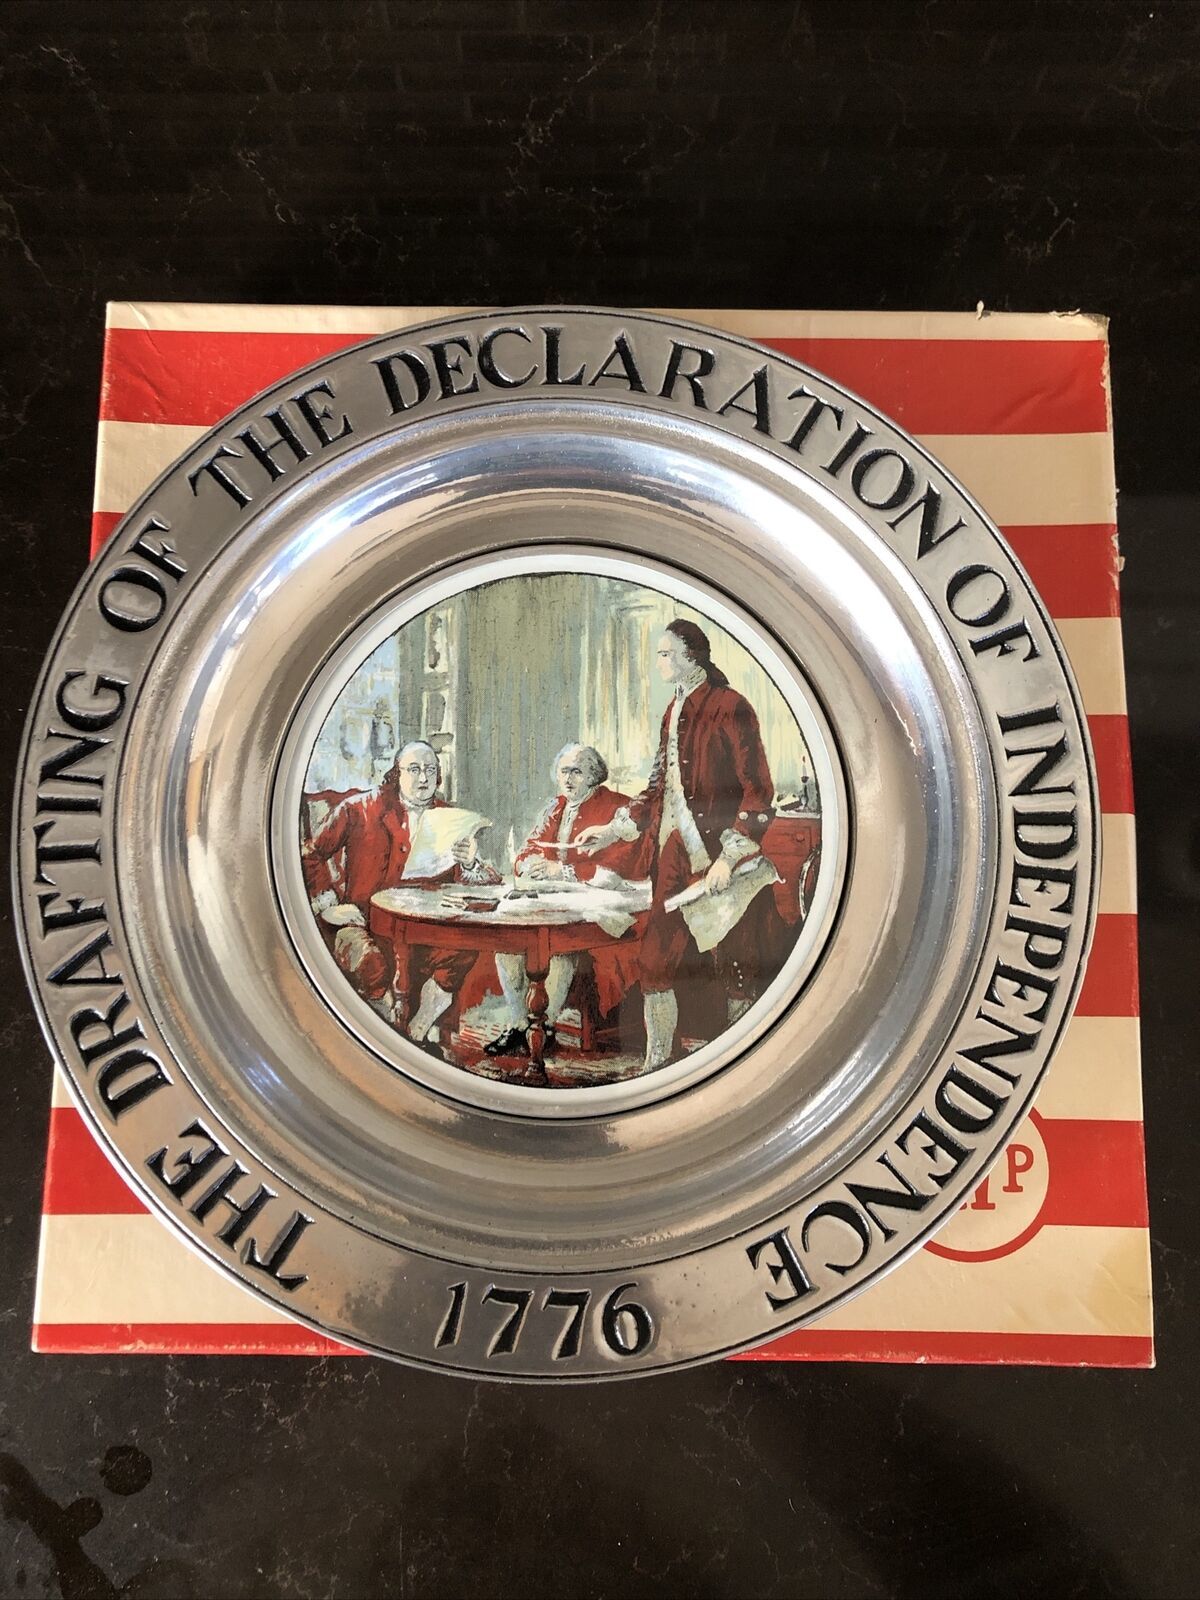 Primary image for Wilton RWP Drafting of the Declaration of Independence 1776 Pewter 11" Plate